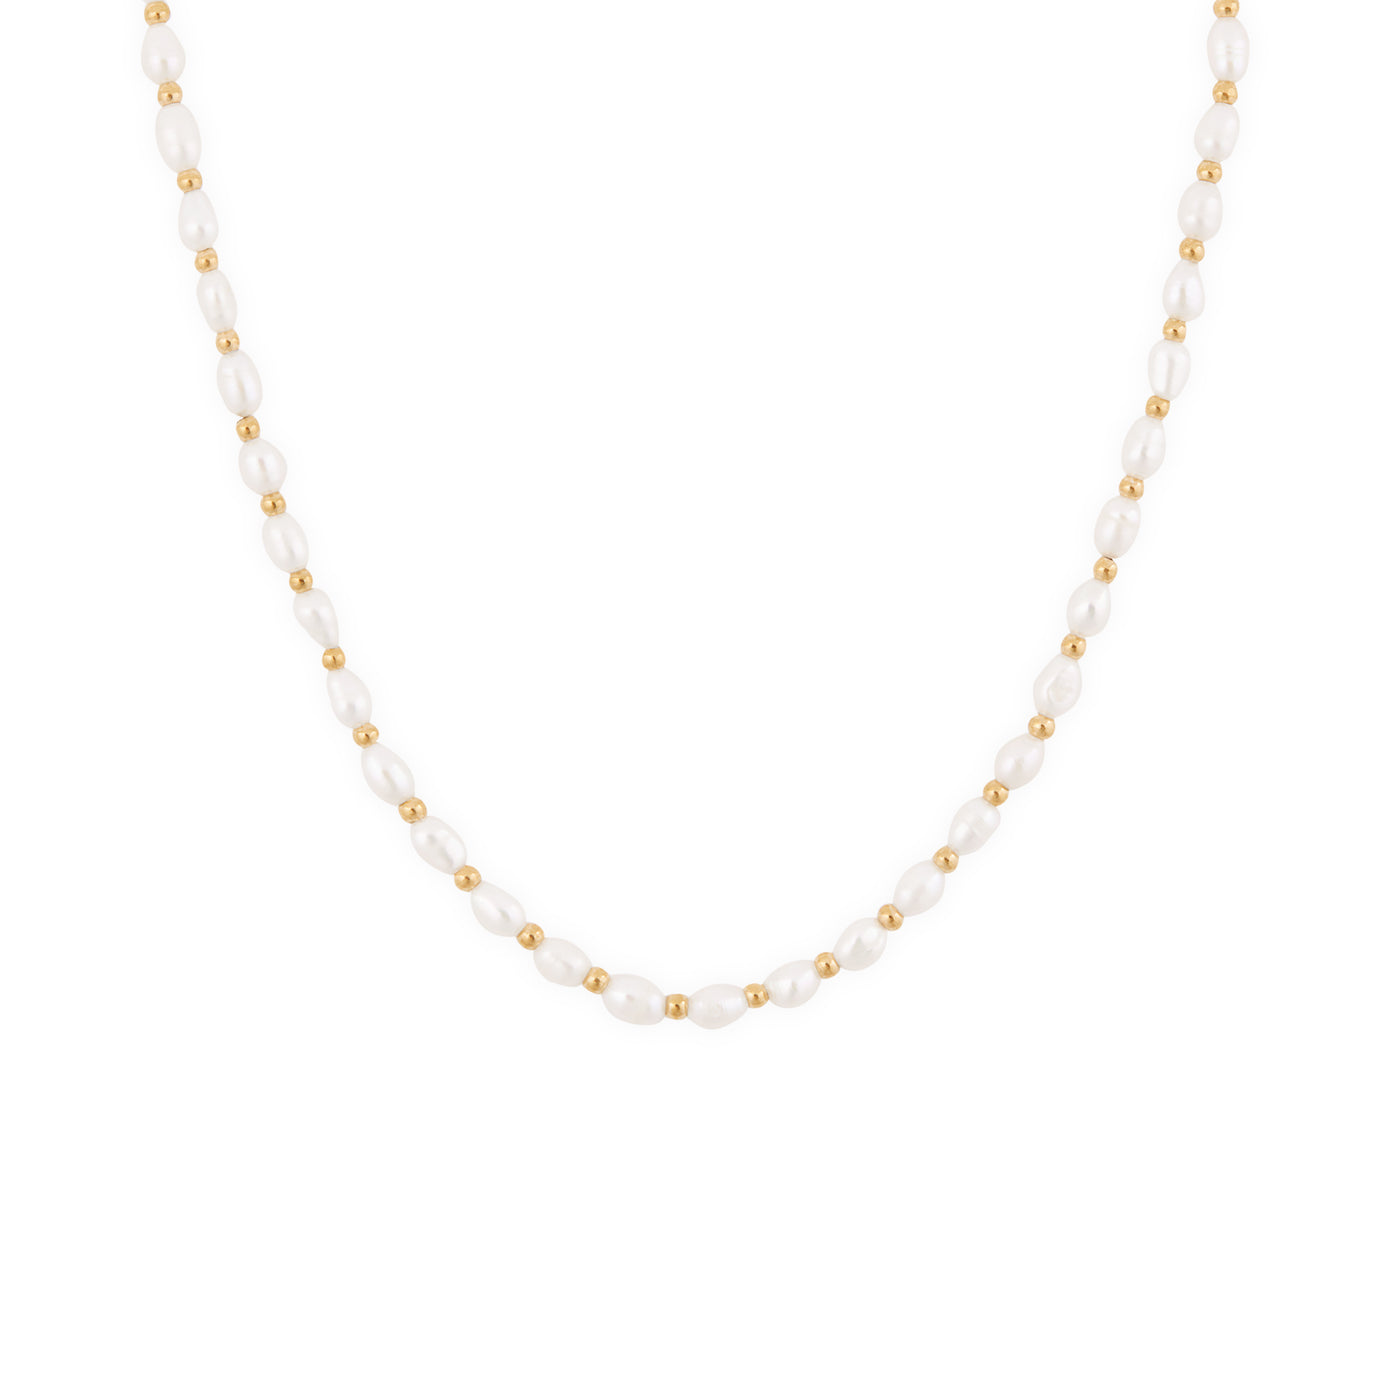 Lagoon Pearl Necklace - Gold